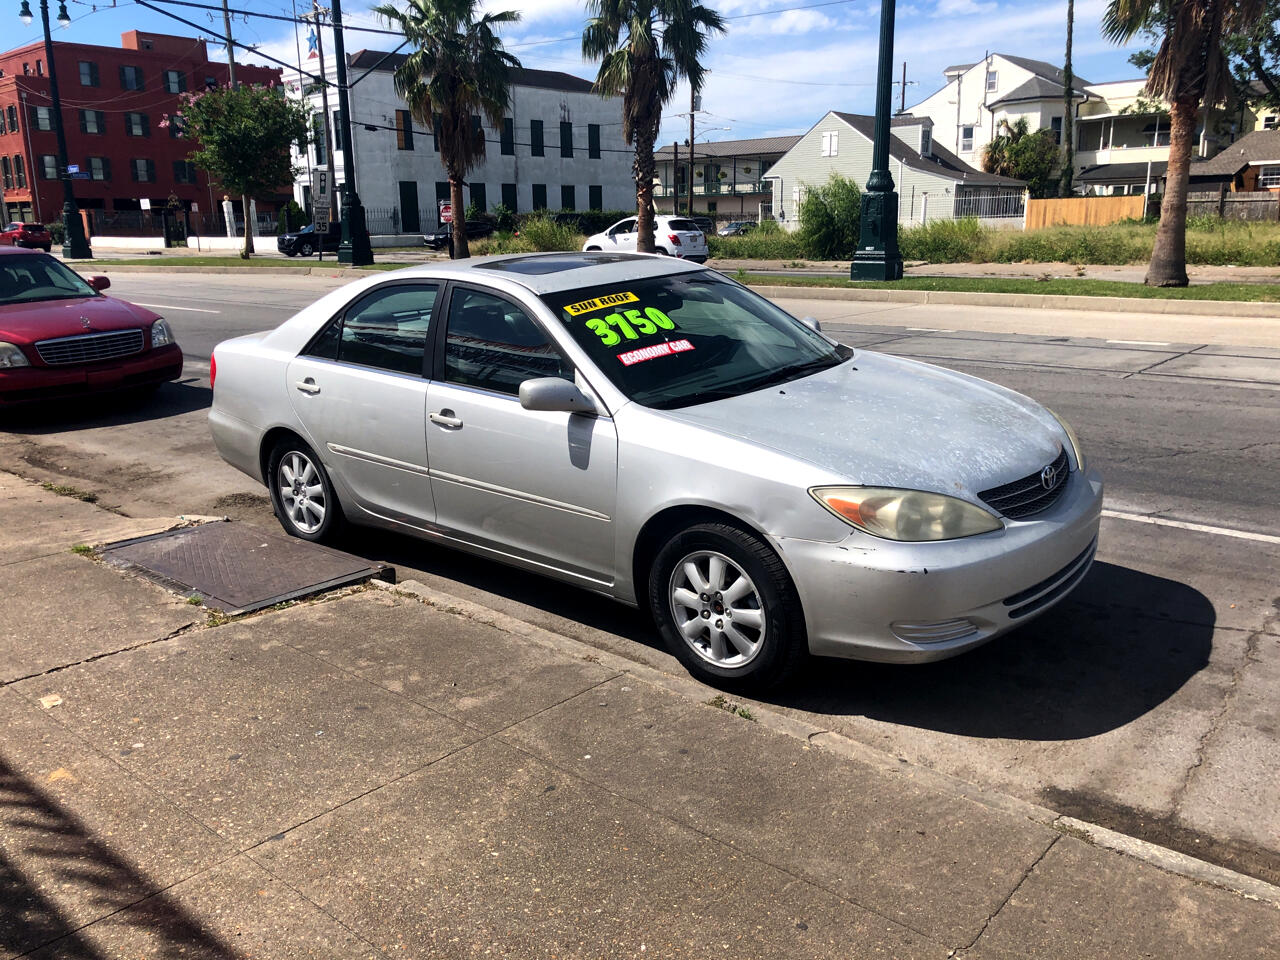 Toyota Camry 4dr Sdn XLE Auto (Natl) 2002